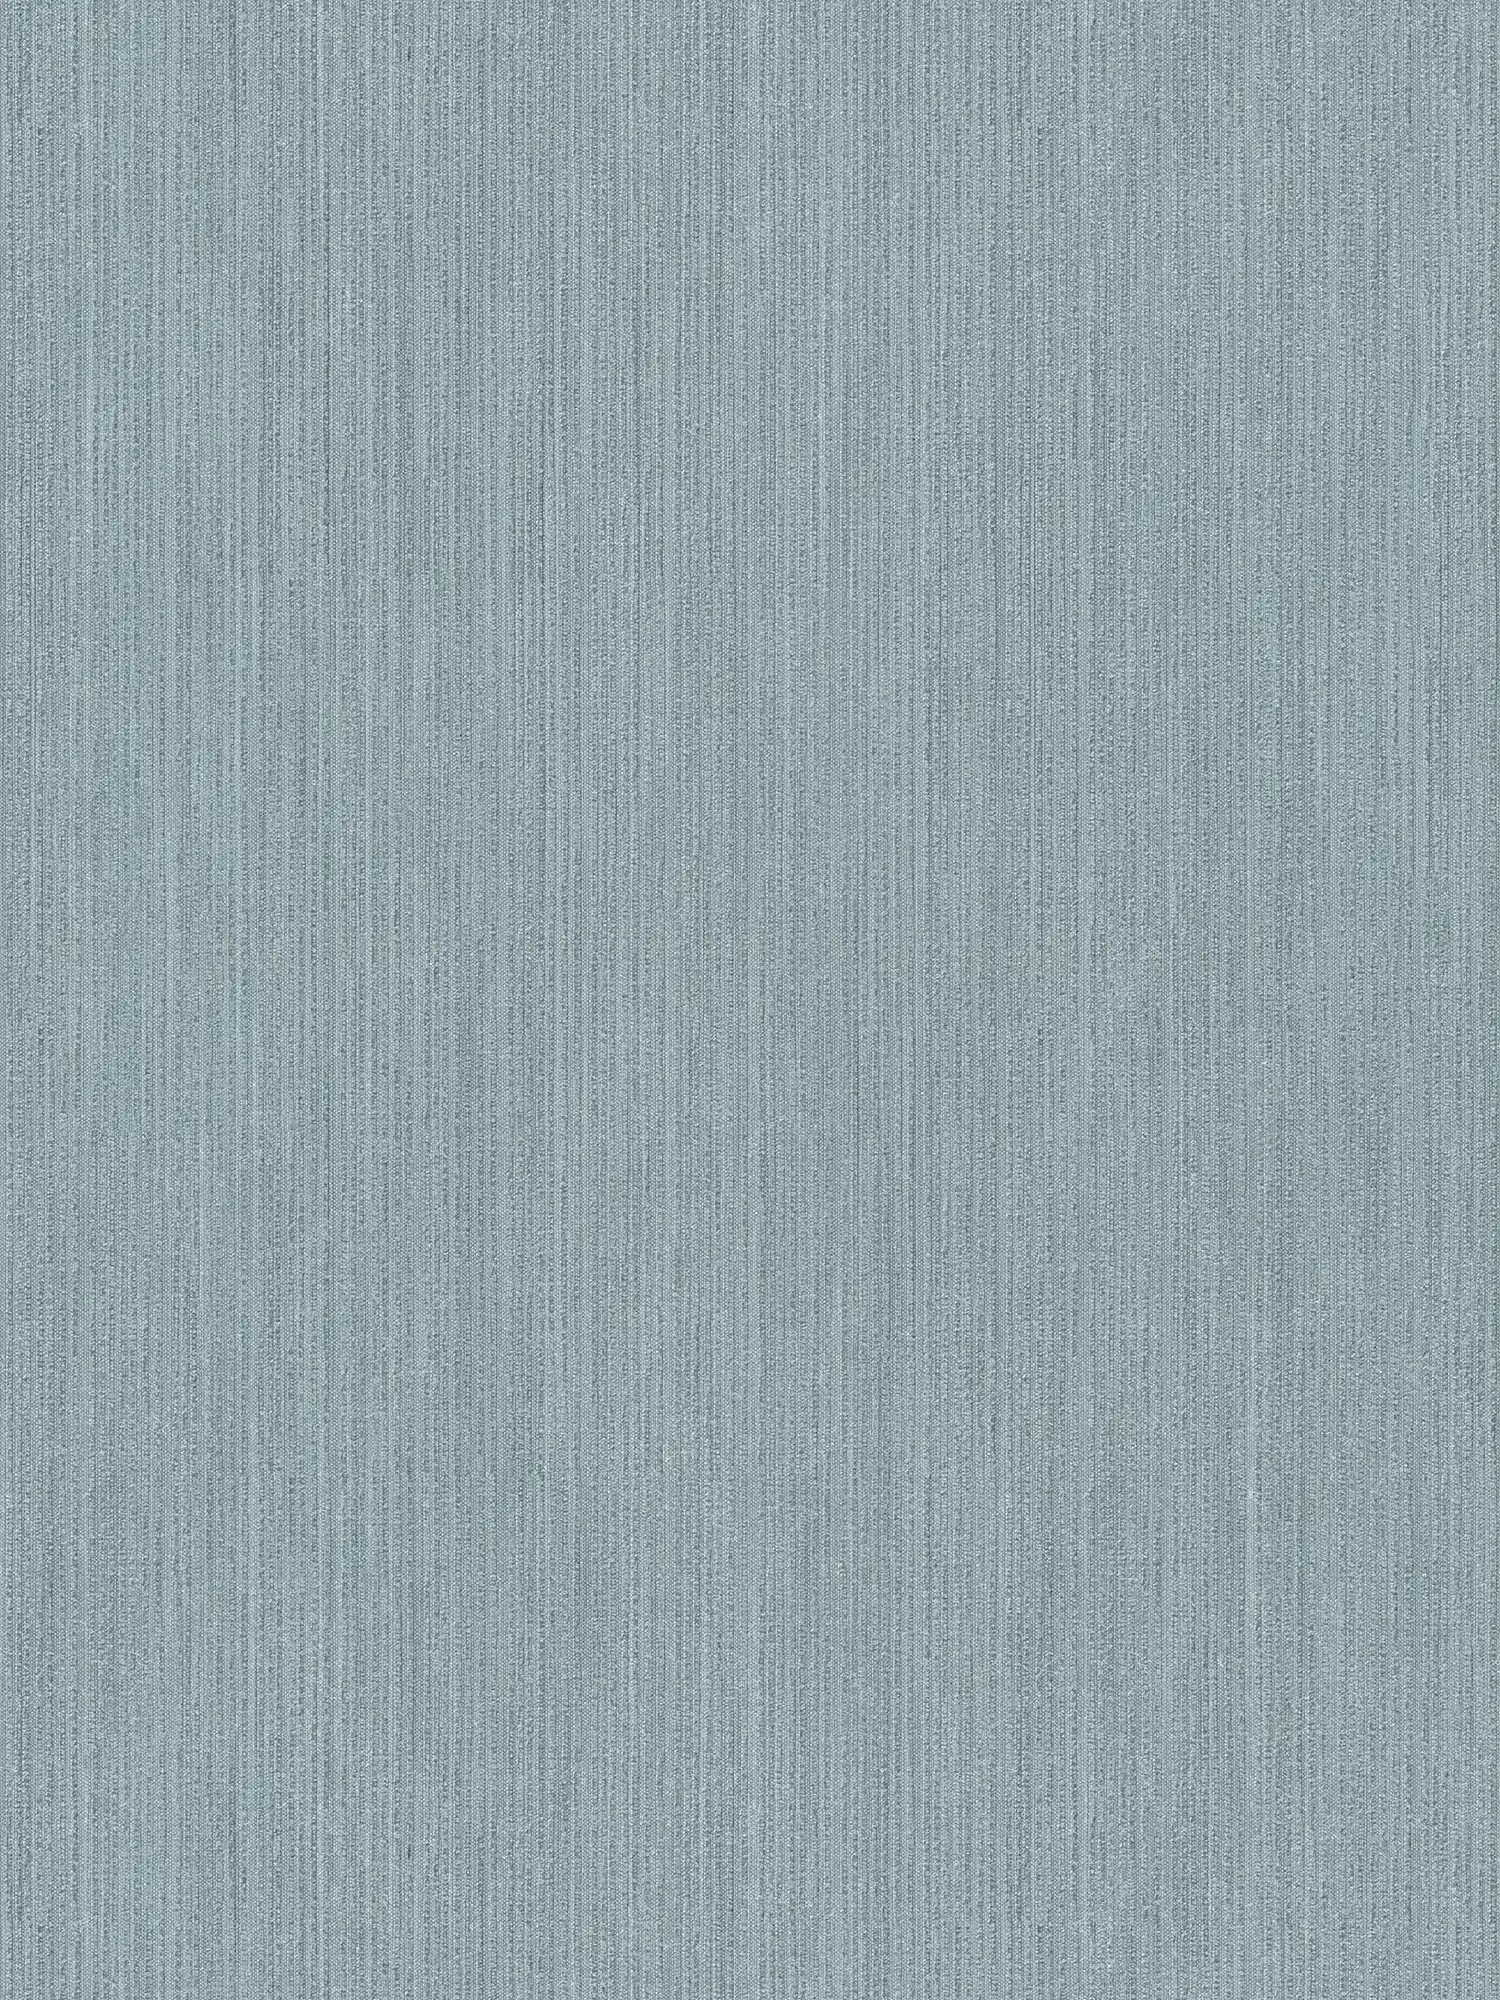 Jeans blue non-woven wallpaper with textile look - blue, green
